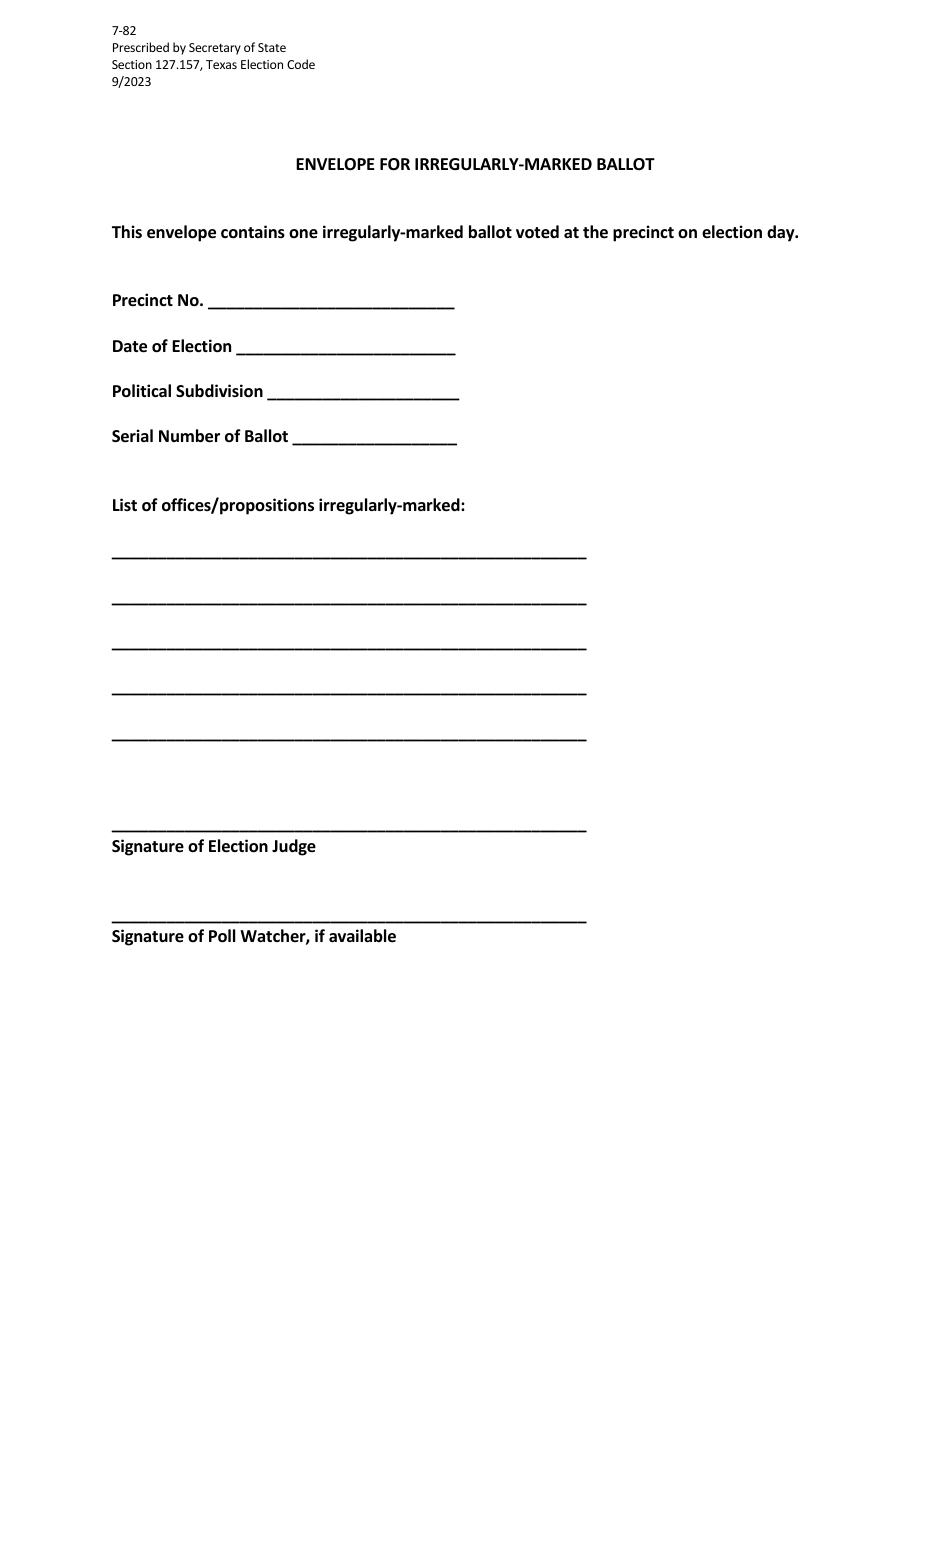 Form 7-82 Envelope for Irregularly-Marked Ballot - Texas, Page 1